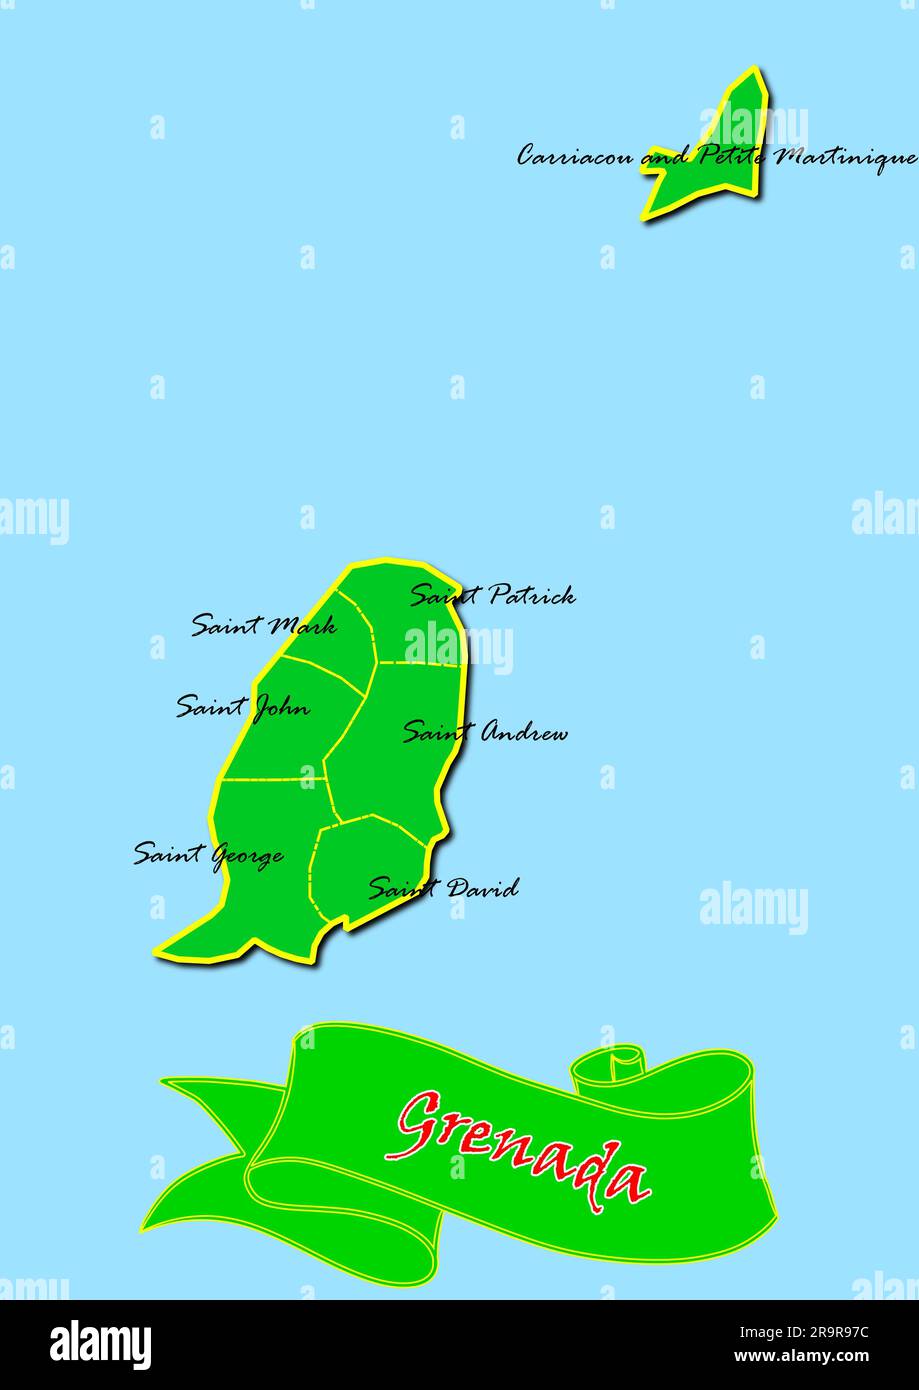 Map of Grenada with Subregions in Green Country Name in Red Stock Photo